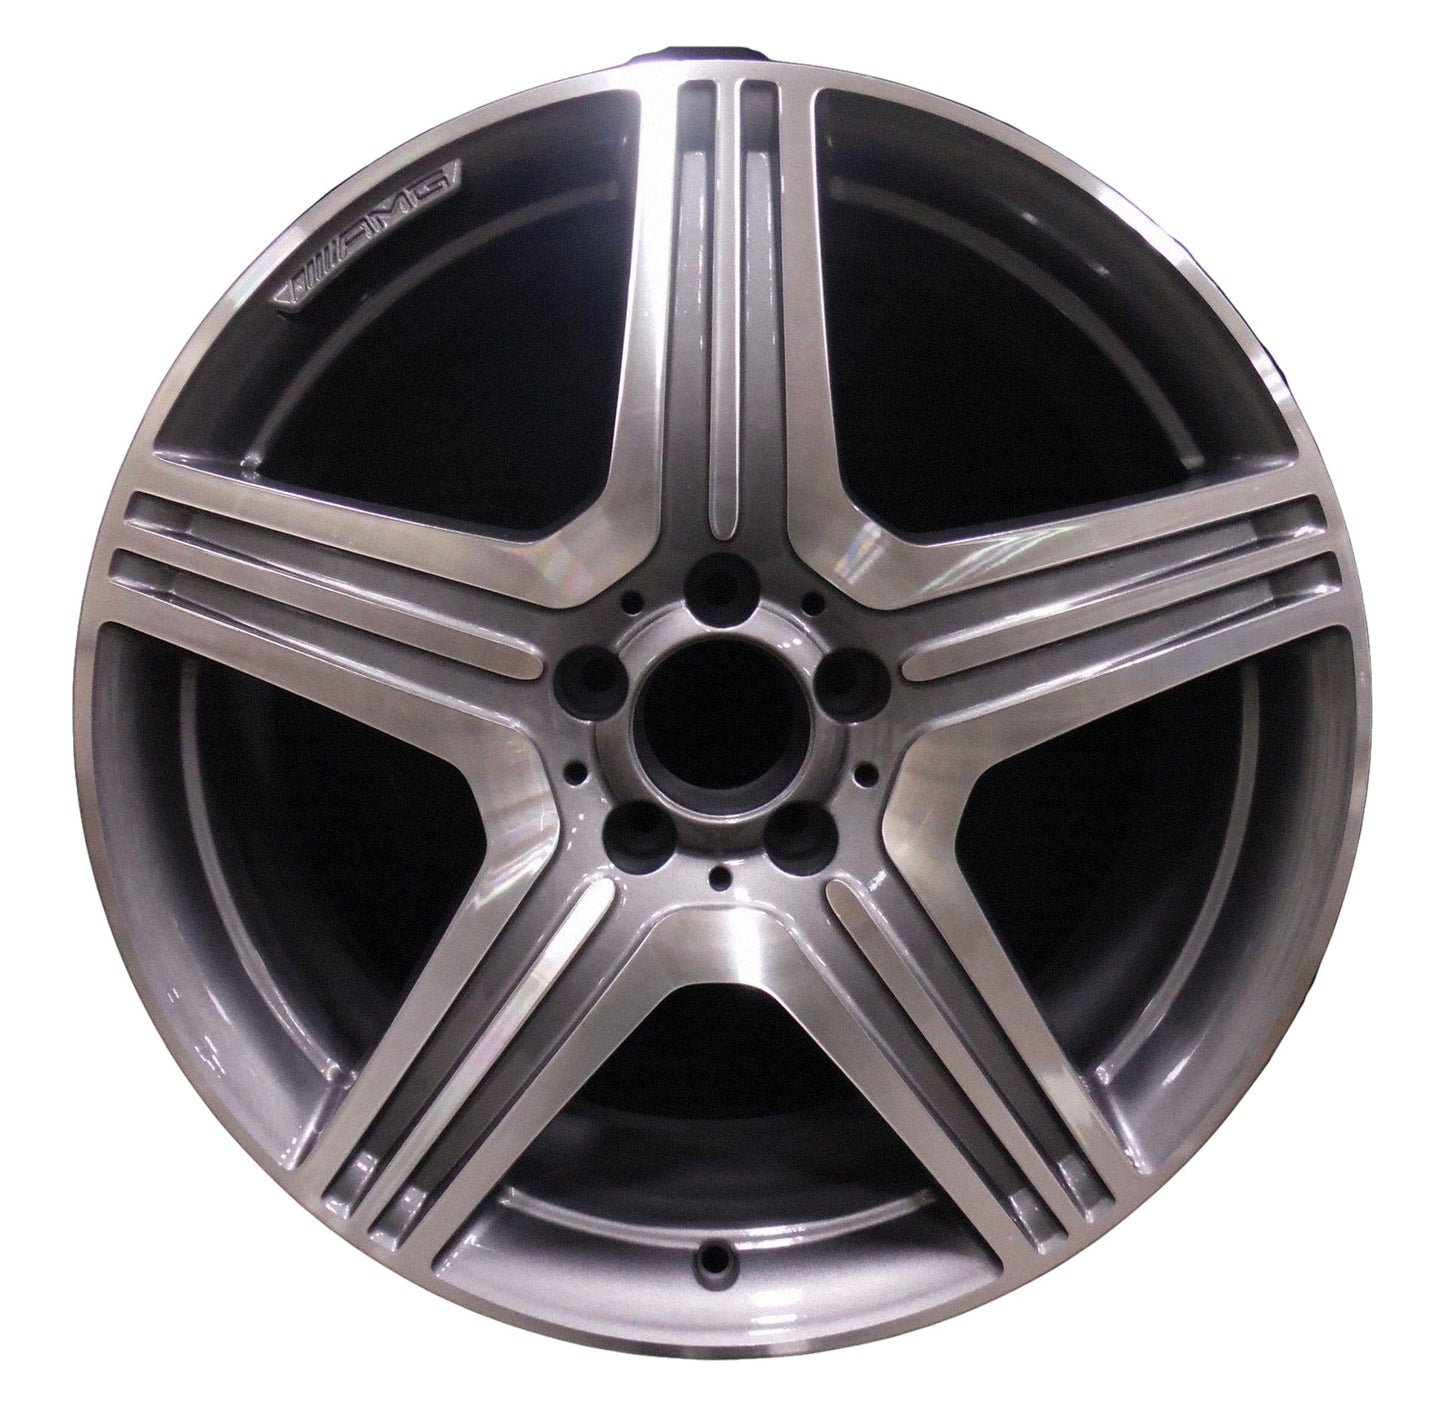 Mercedes CLS550  2012, 2013, 2014 Factory OEM Car Wheel Size 19x9 Alloy WAO.85234FT.LC17.MABRT